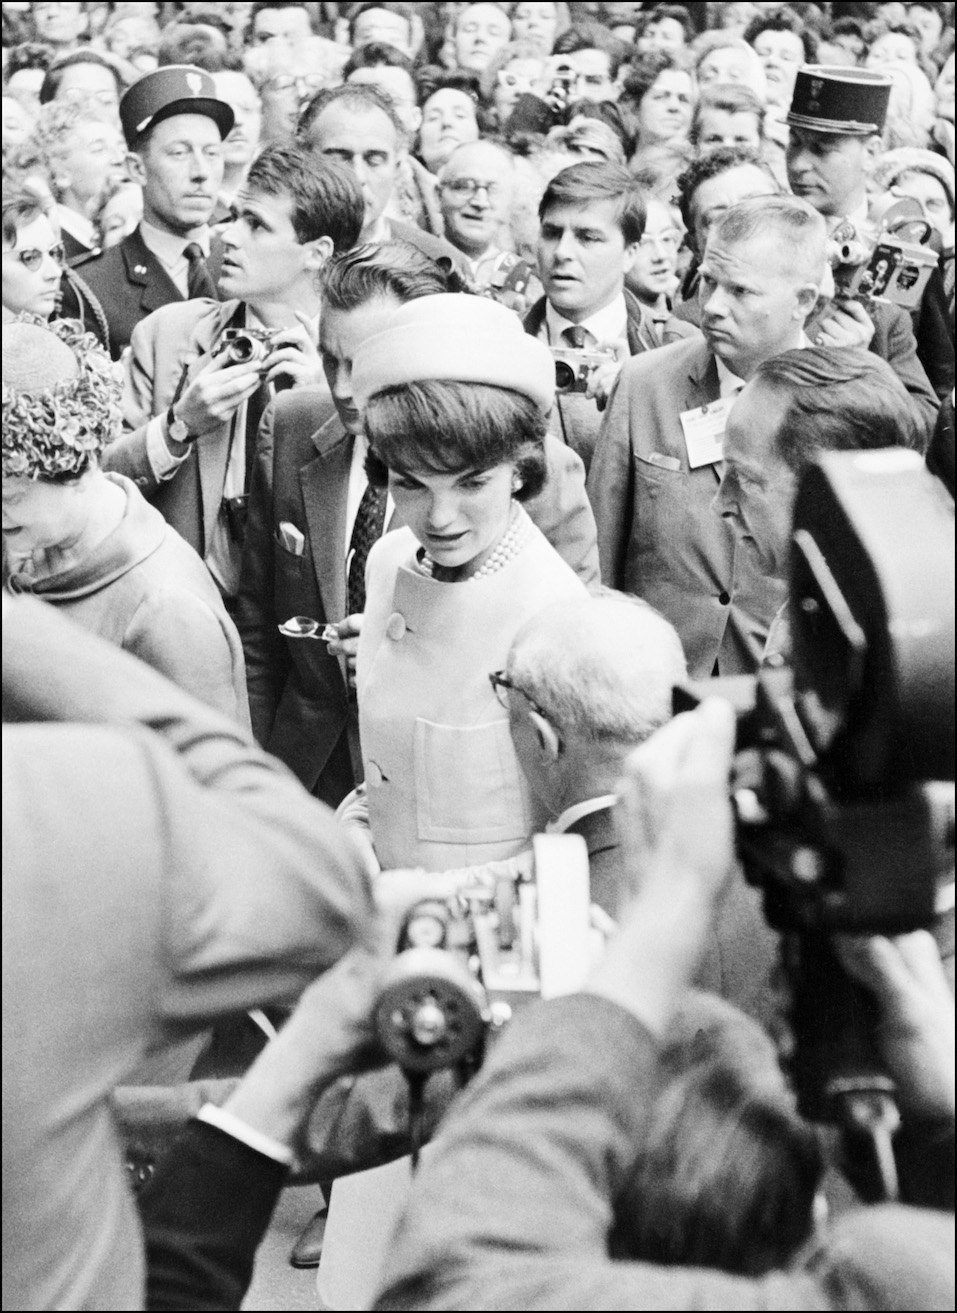 US First Lady, Jacqueline Kennedy is greeted by the crowd during her visit in Paris